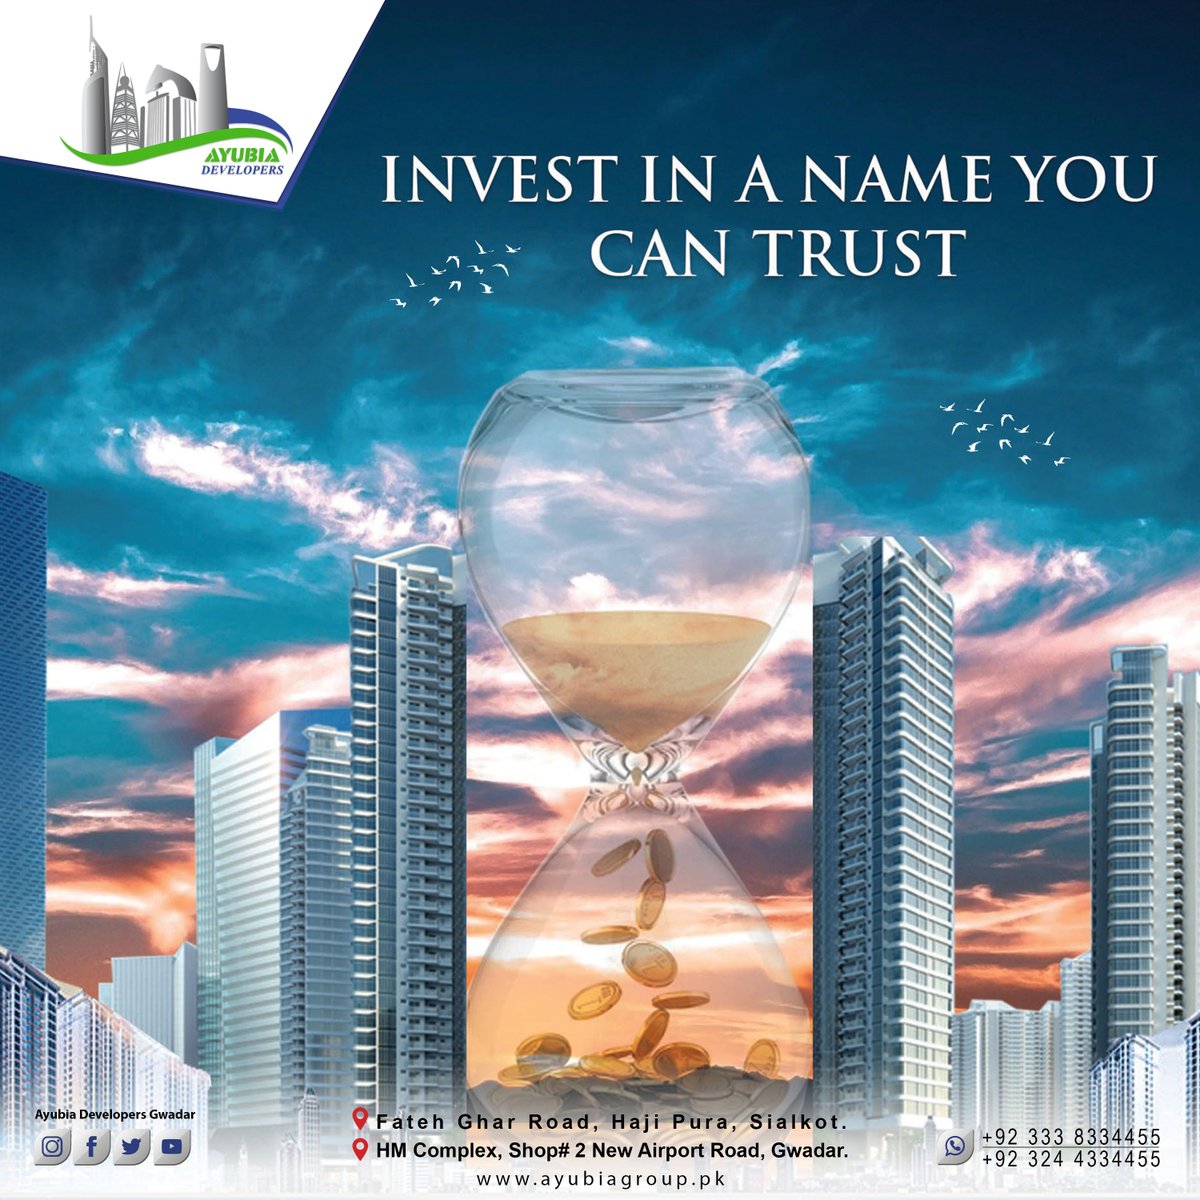 Invest In A Name You Can Trust.
Gwadar Plots Available.
Residential & Commercial Plots Available.
private housing societies & Government housing societies
#gwadar #gwadarport #gawadarbeach #plotsforsale #sale #pakistan #realestate #property #sialkot #sialkotproperty